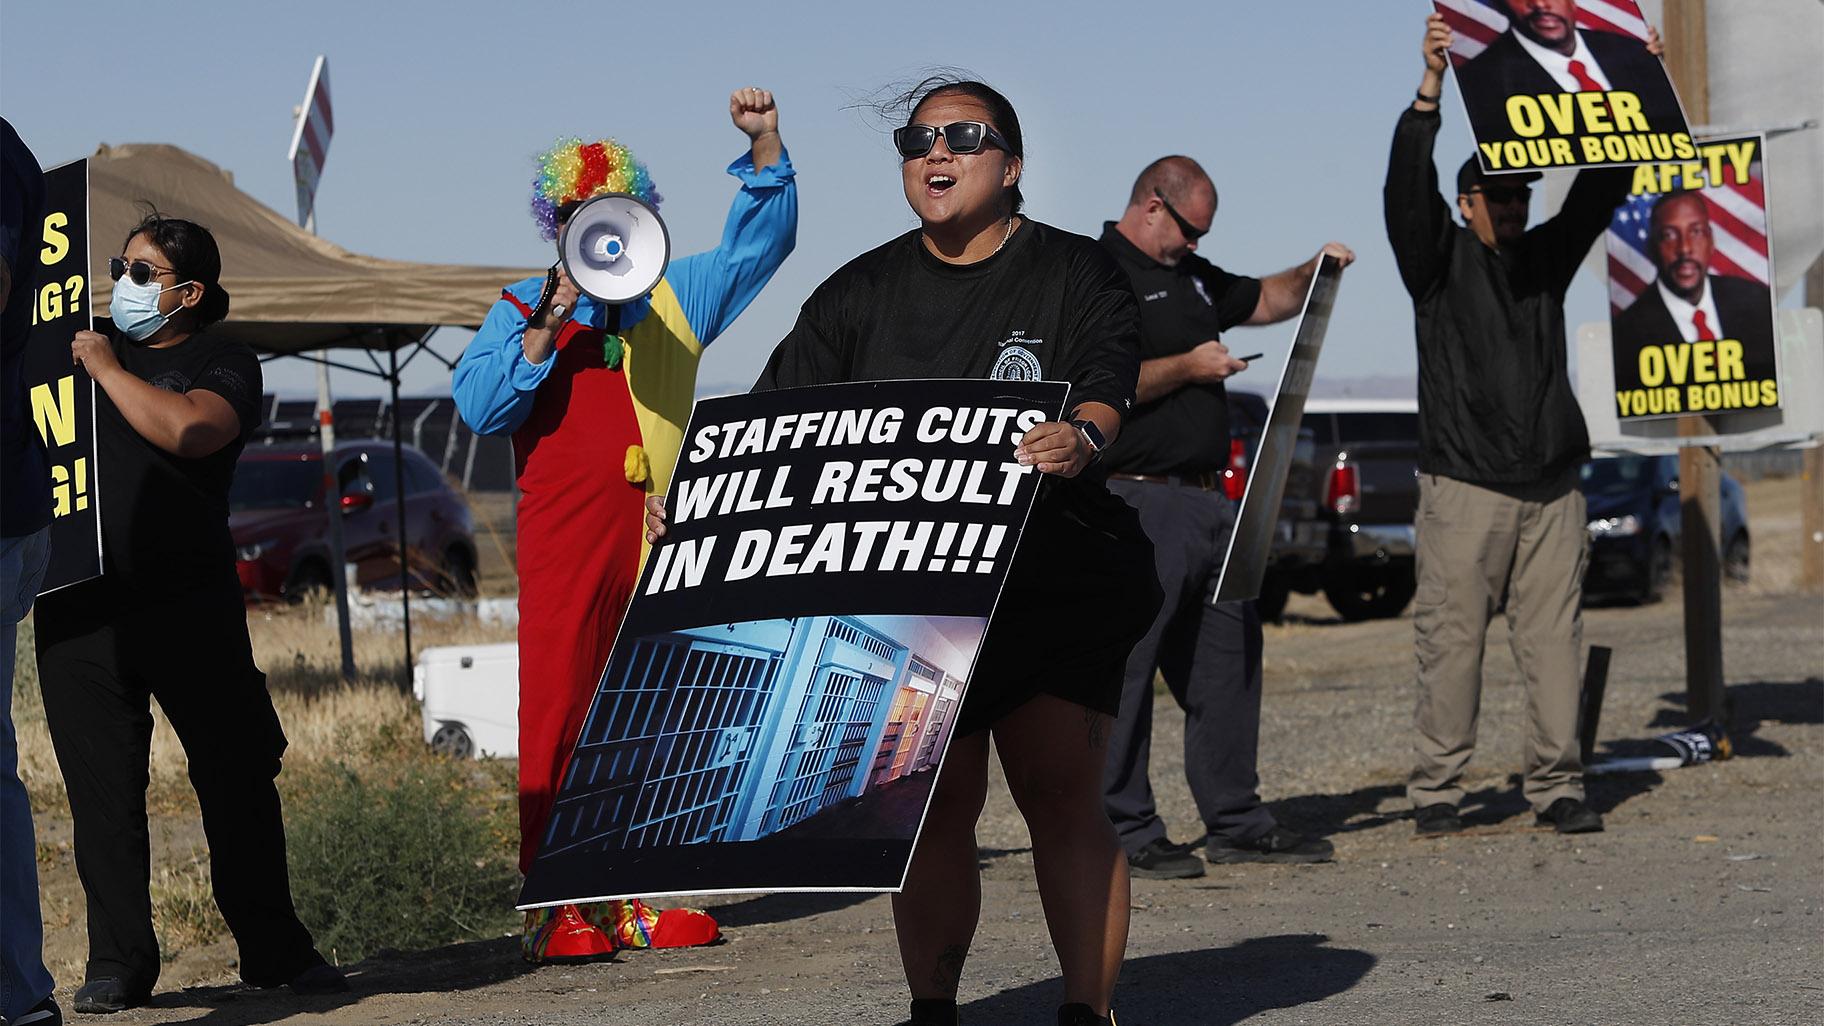 Noni Ahulau, from Honolulu, along with others, protests staffing shortages at the Federal Correctional Institution at Mendota, Monday, May 17, 2021, near the facility, in Mendota, Calif. The signs being displayed and held, at right, show a picture of FCI Mendota Warden Douglas K. White. (AP Photo / Gary Kazanjian)